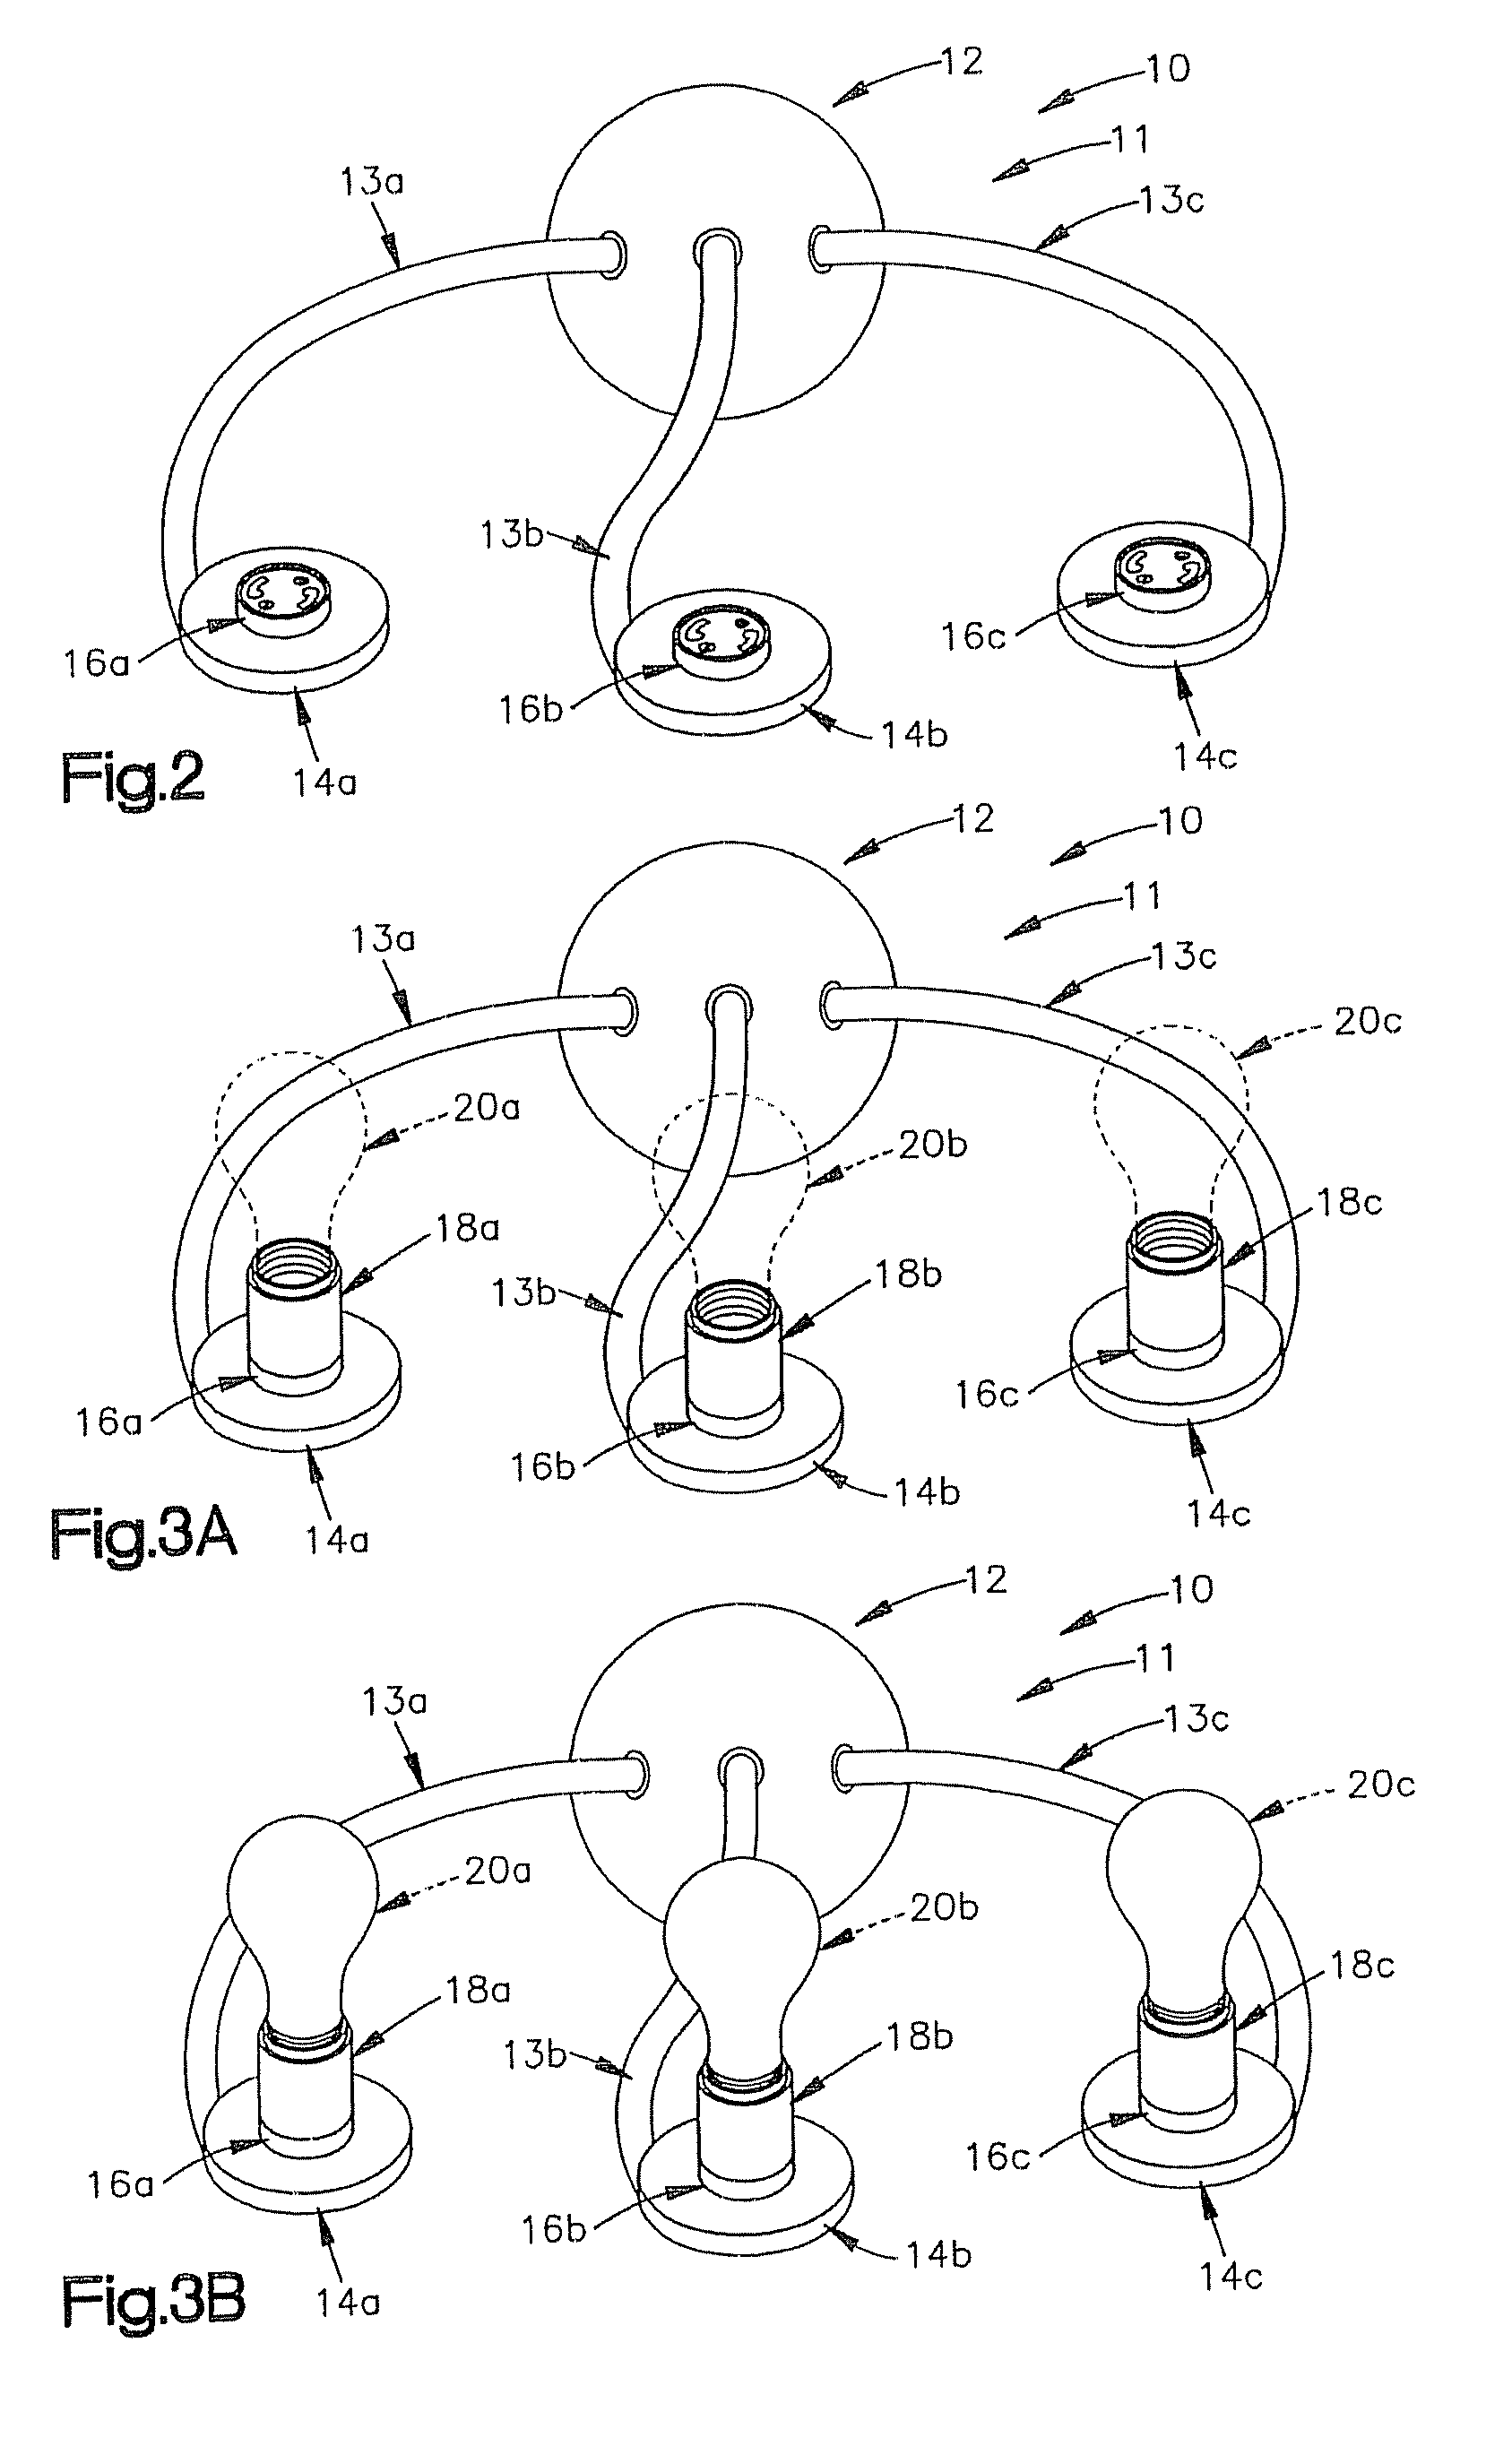 Incandescent and LED light bulbs and methods and devices for converting between incandescent lighting products and low-power lighting products